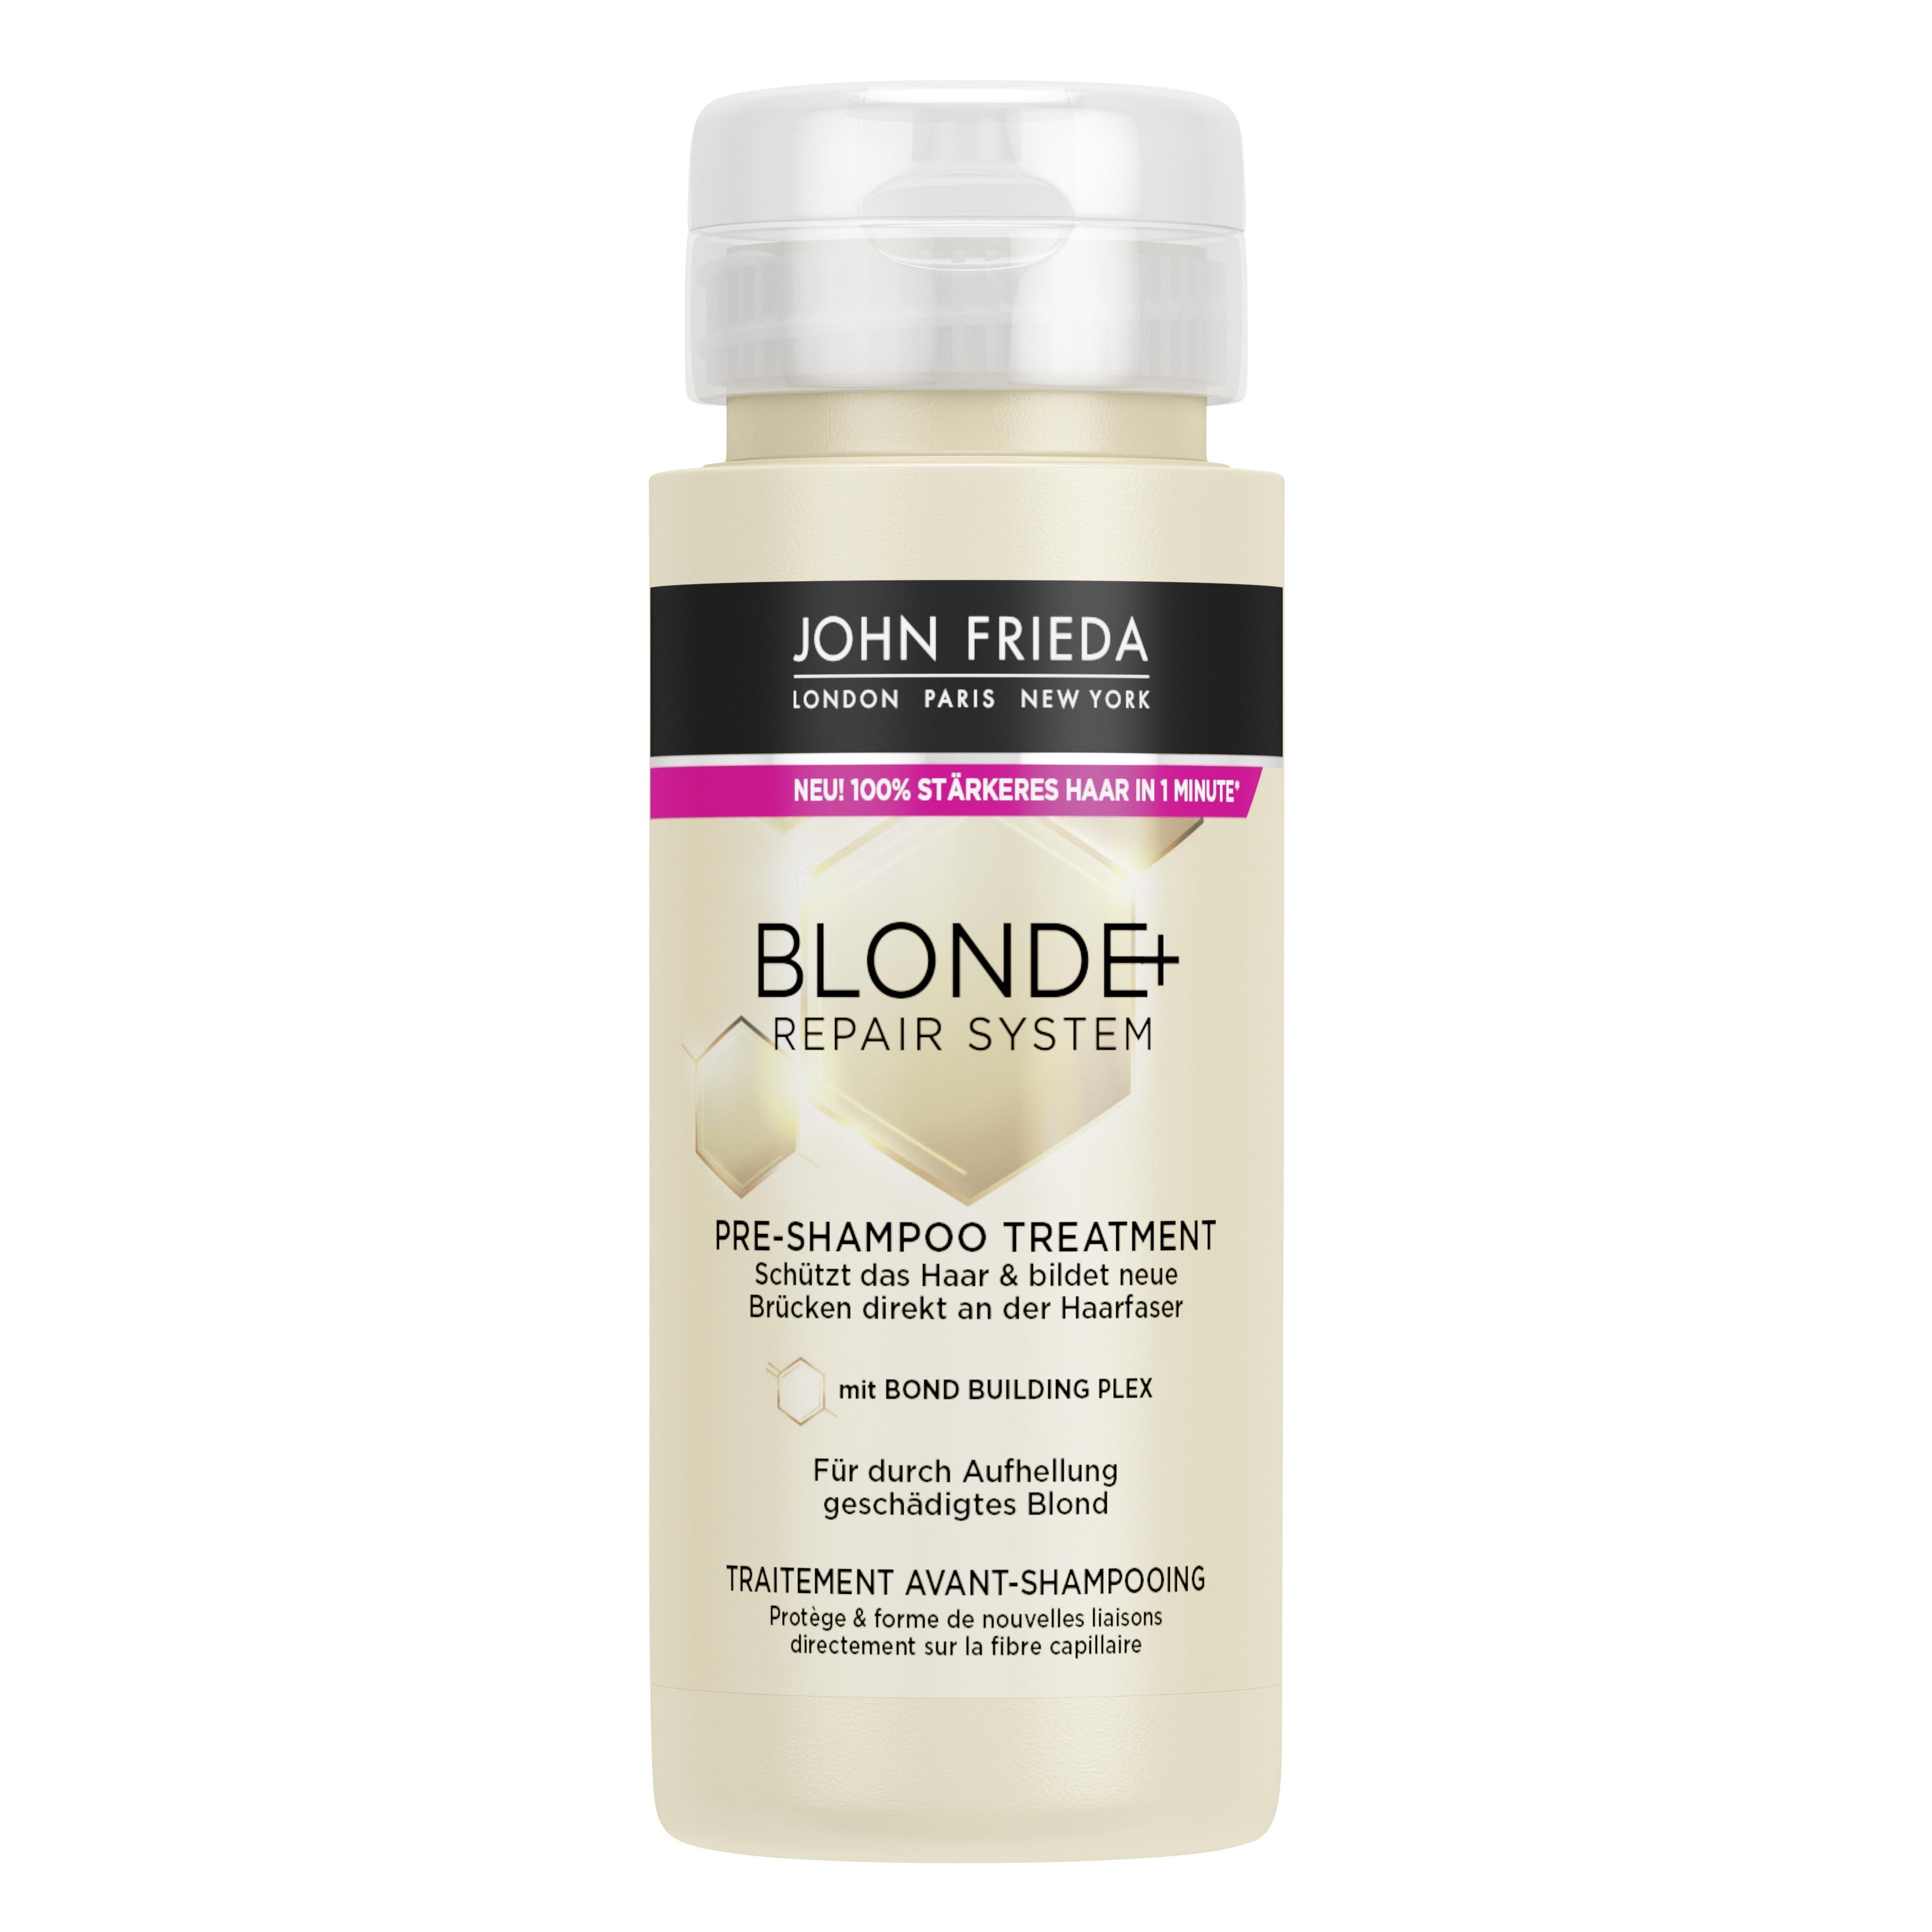 Product image from Blonde+ Repair System - Blonde+ Bond Builiding Pre-Shampoo Treatment